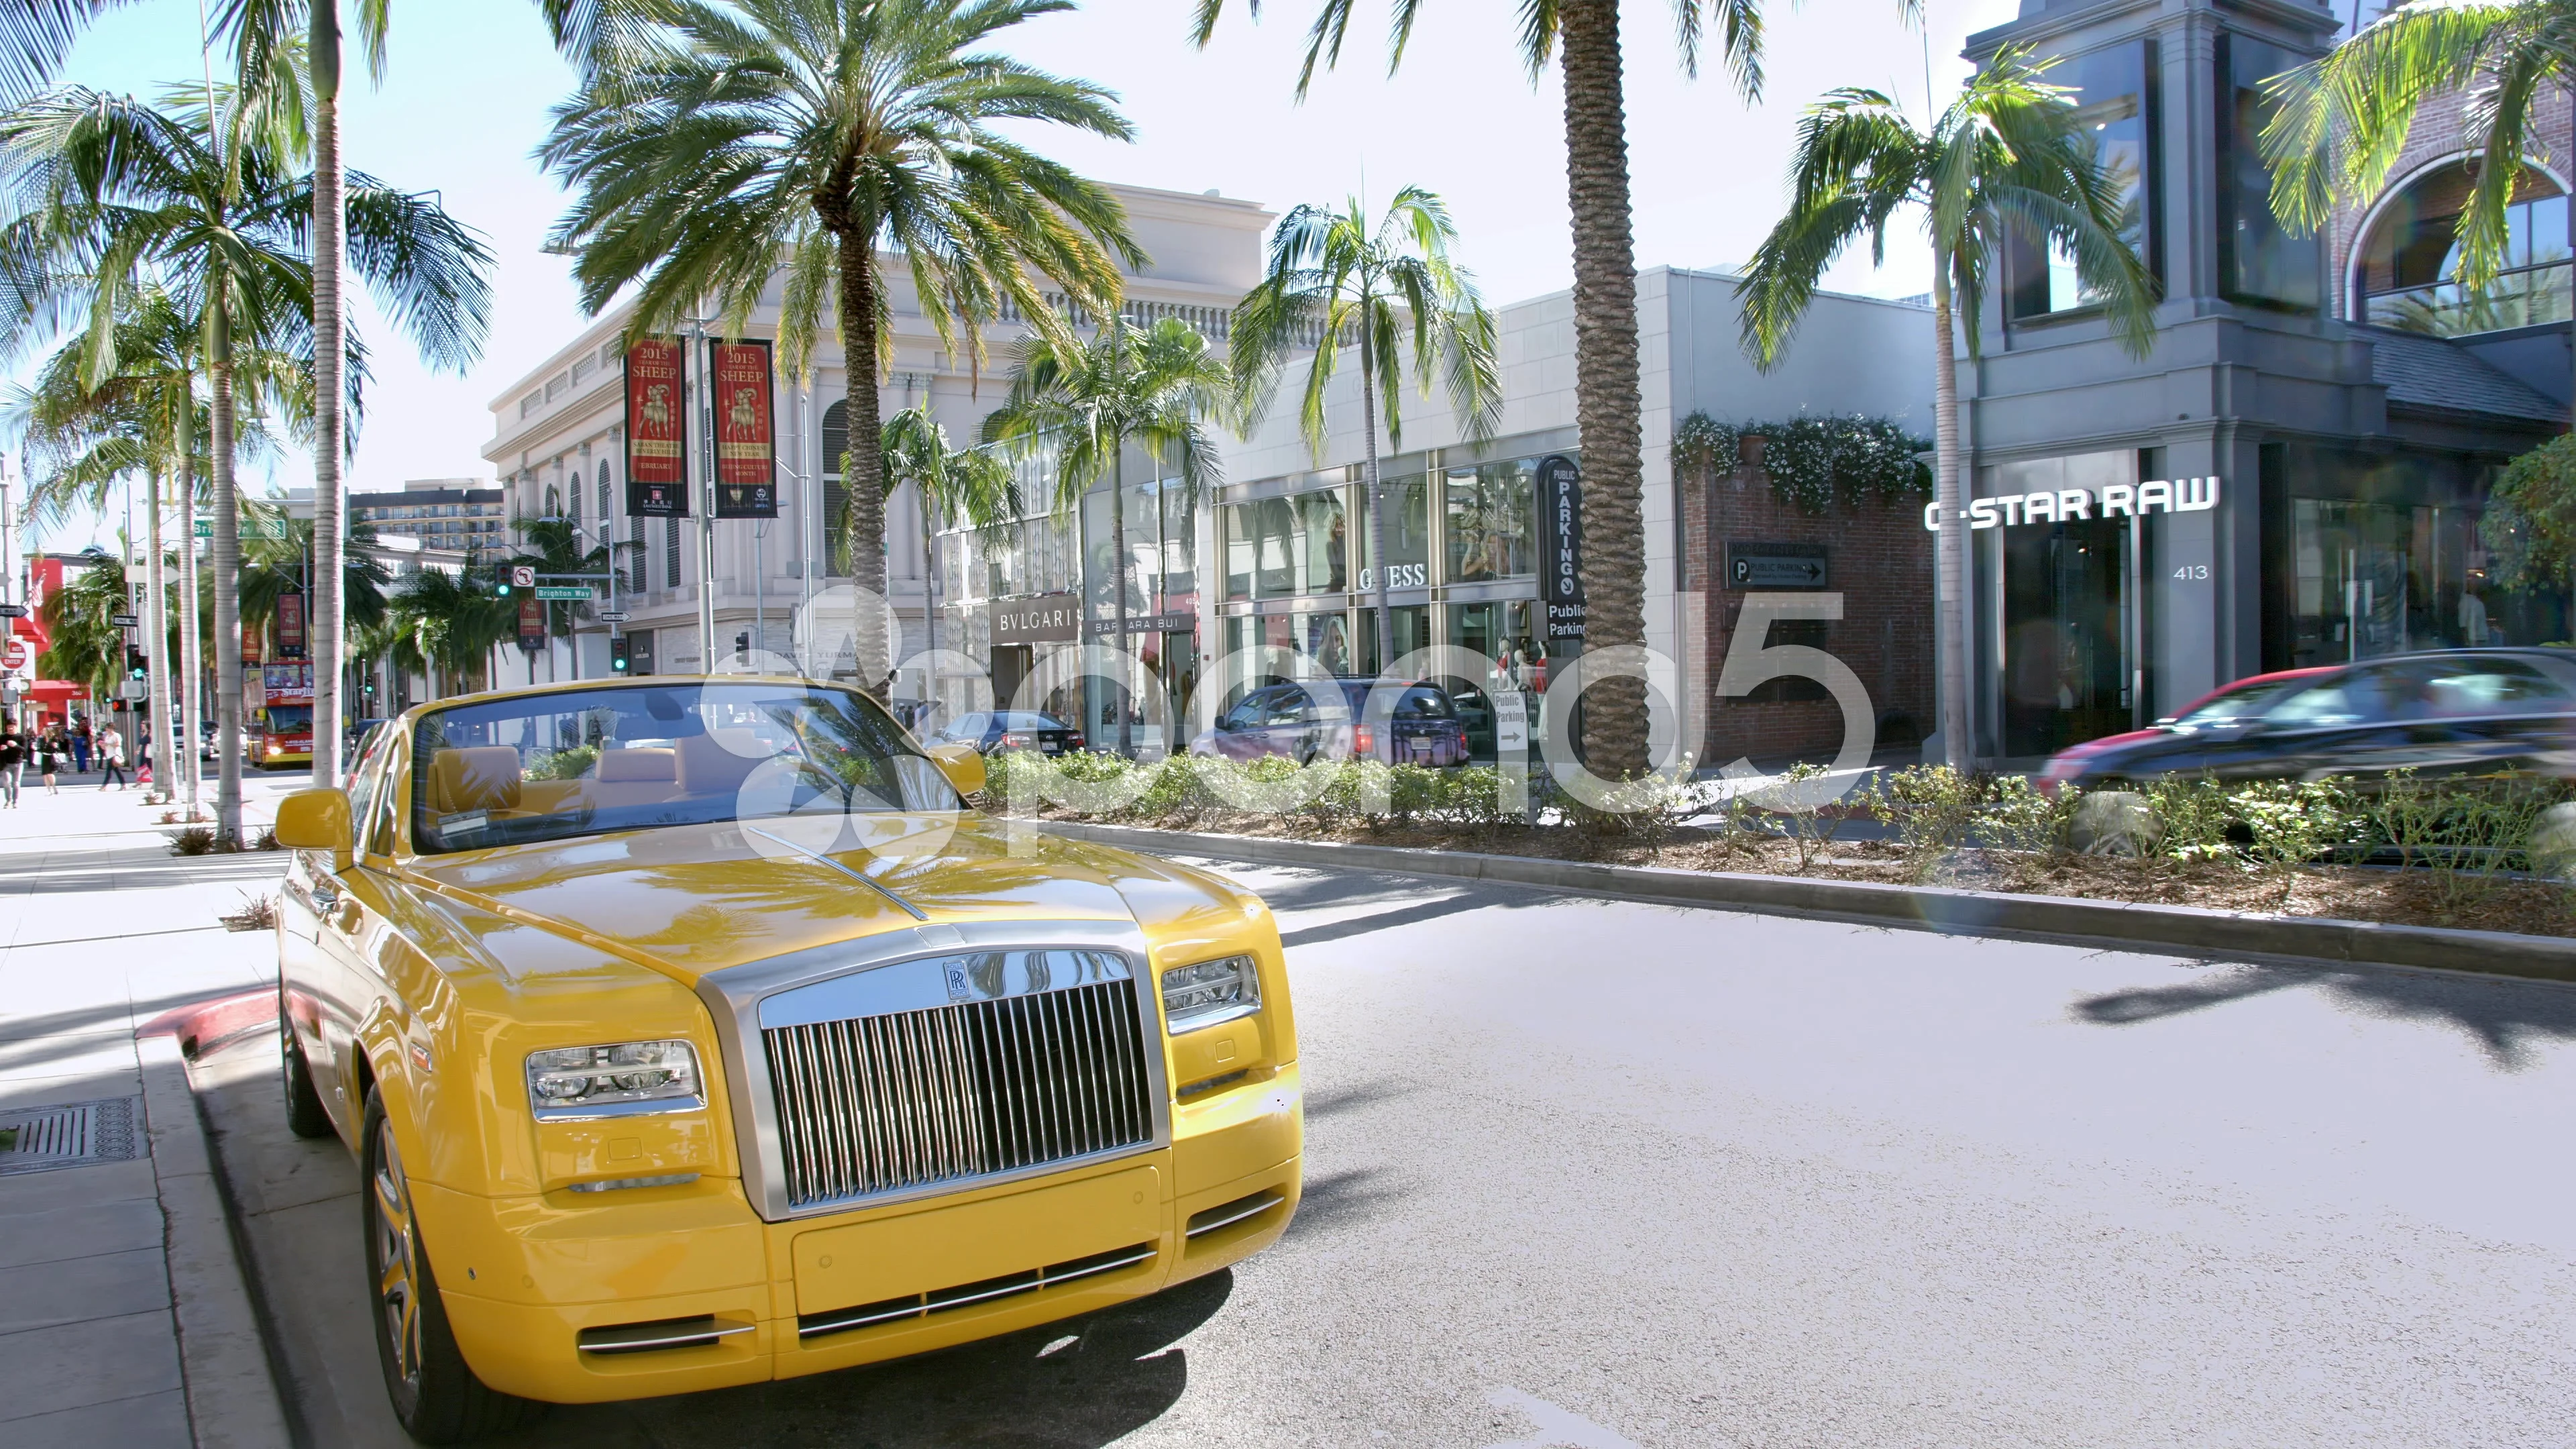 Rodeo drive, Beverly Hills, Ca. Luxury cars on Rodeo drive, in